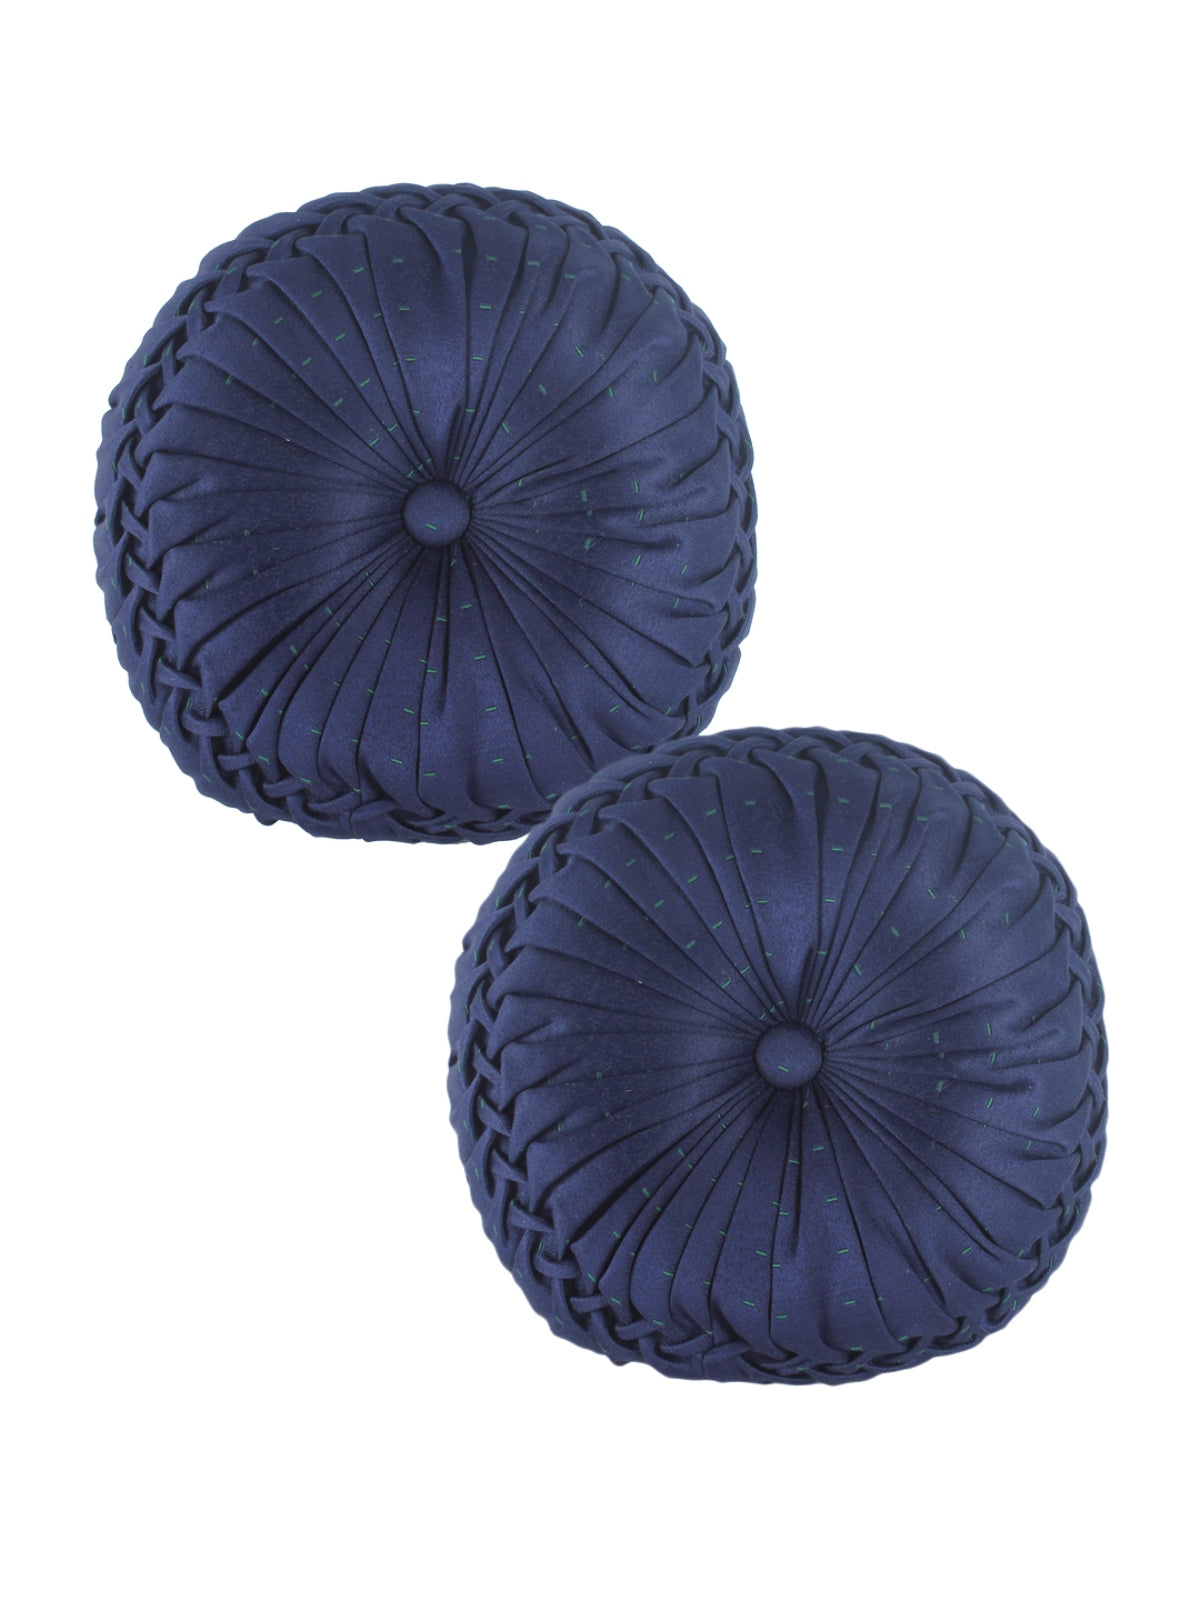 Solid Round Cushion Set of 2, Royal Blue